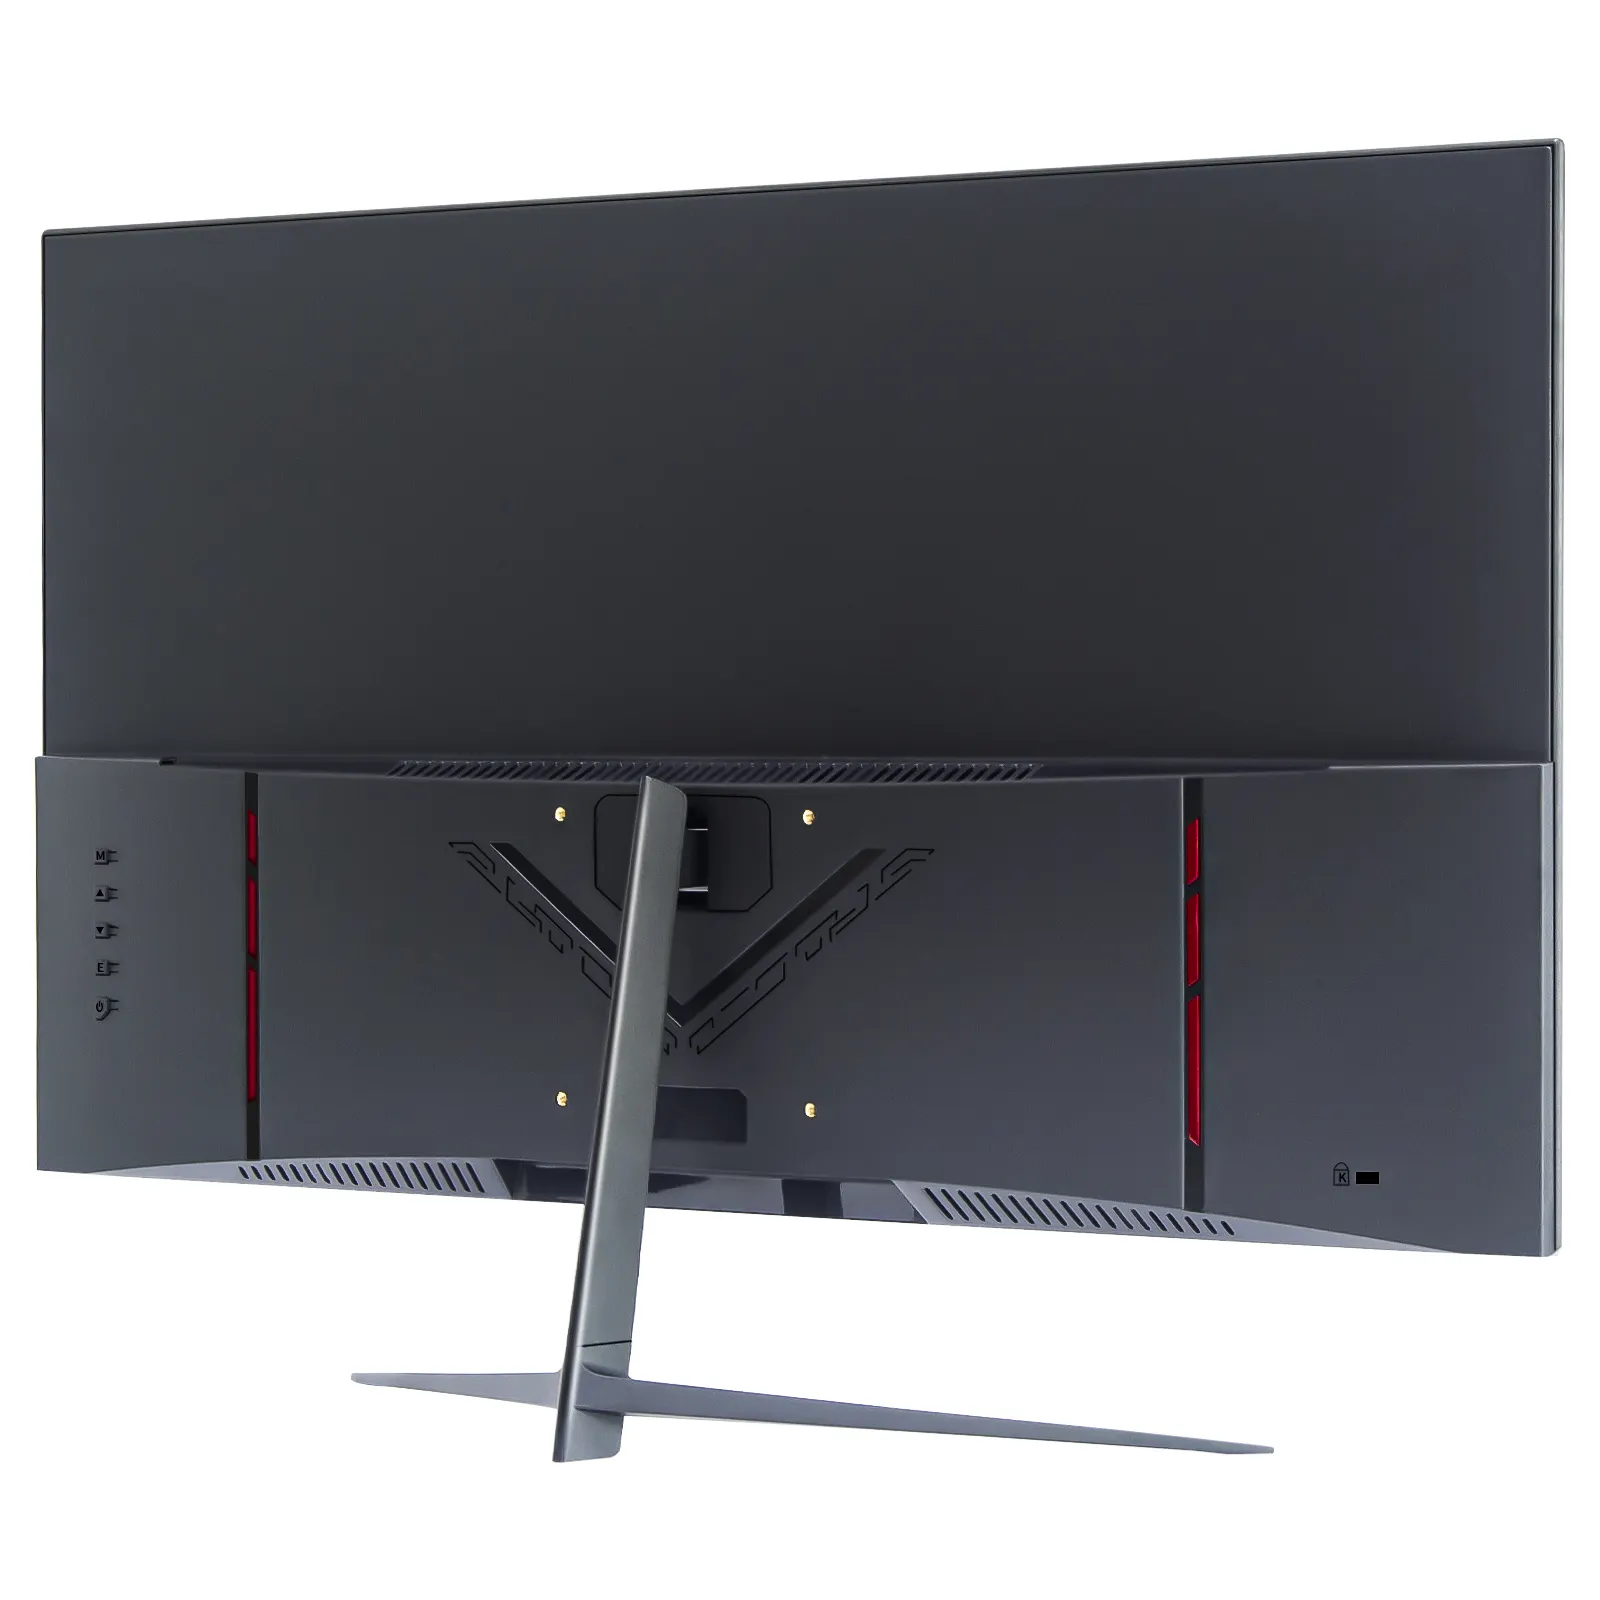 Tecmiyo R1500 VA 27inch FHD 3-frameless Bezel Curved LED LCD Gaming Monitor With V-Shape Stand